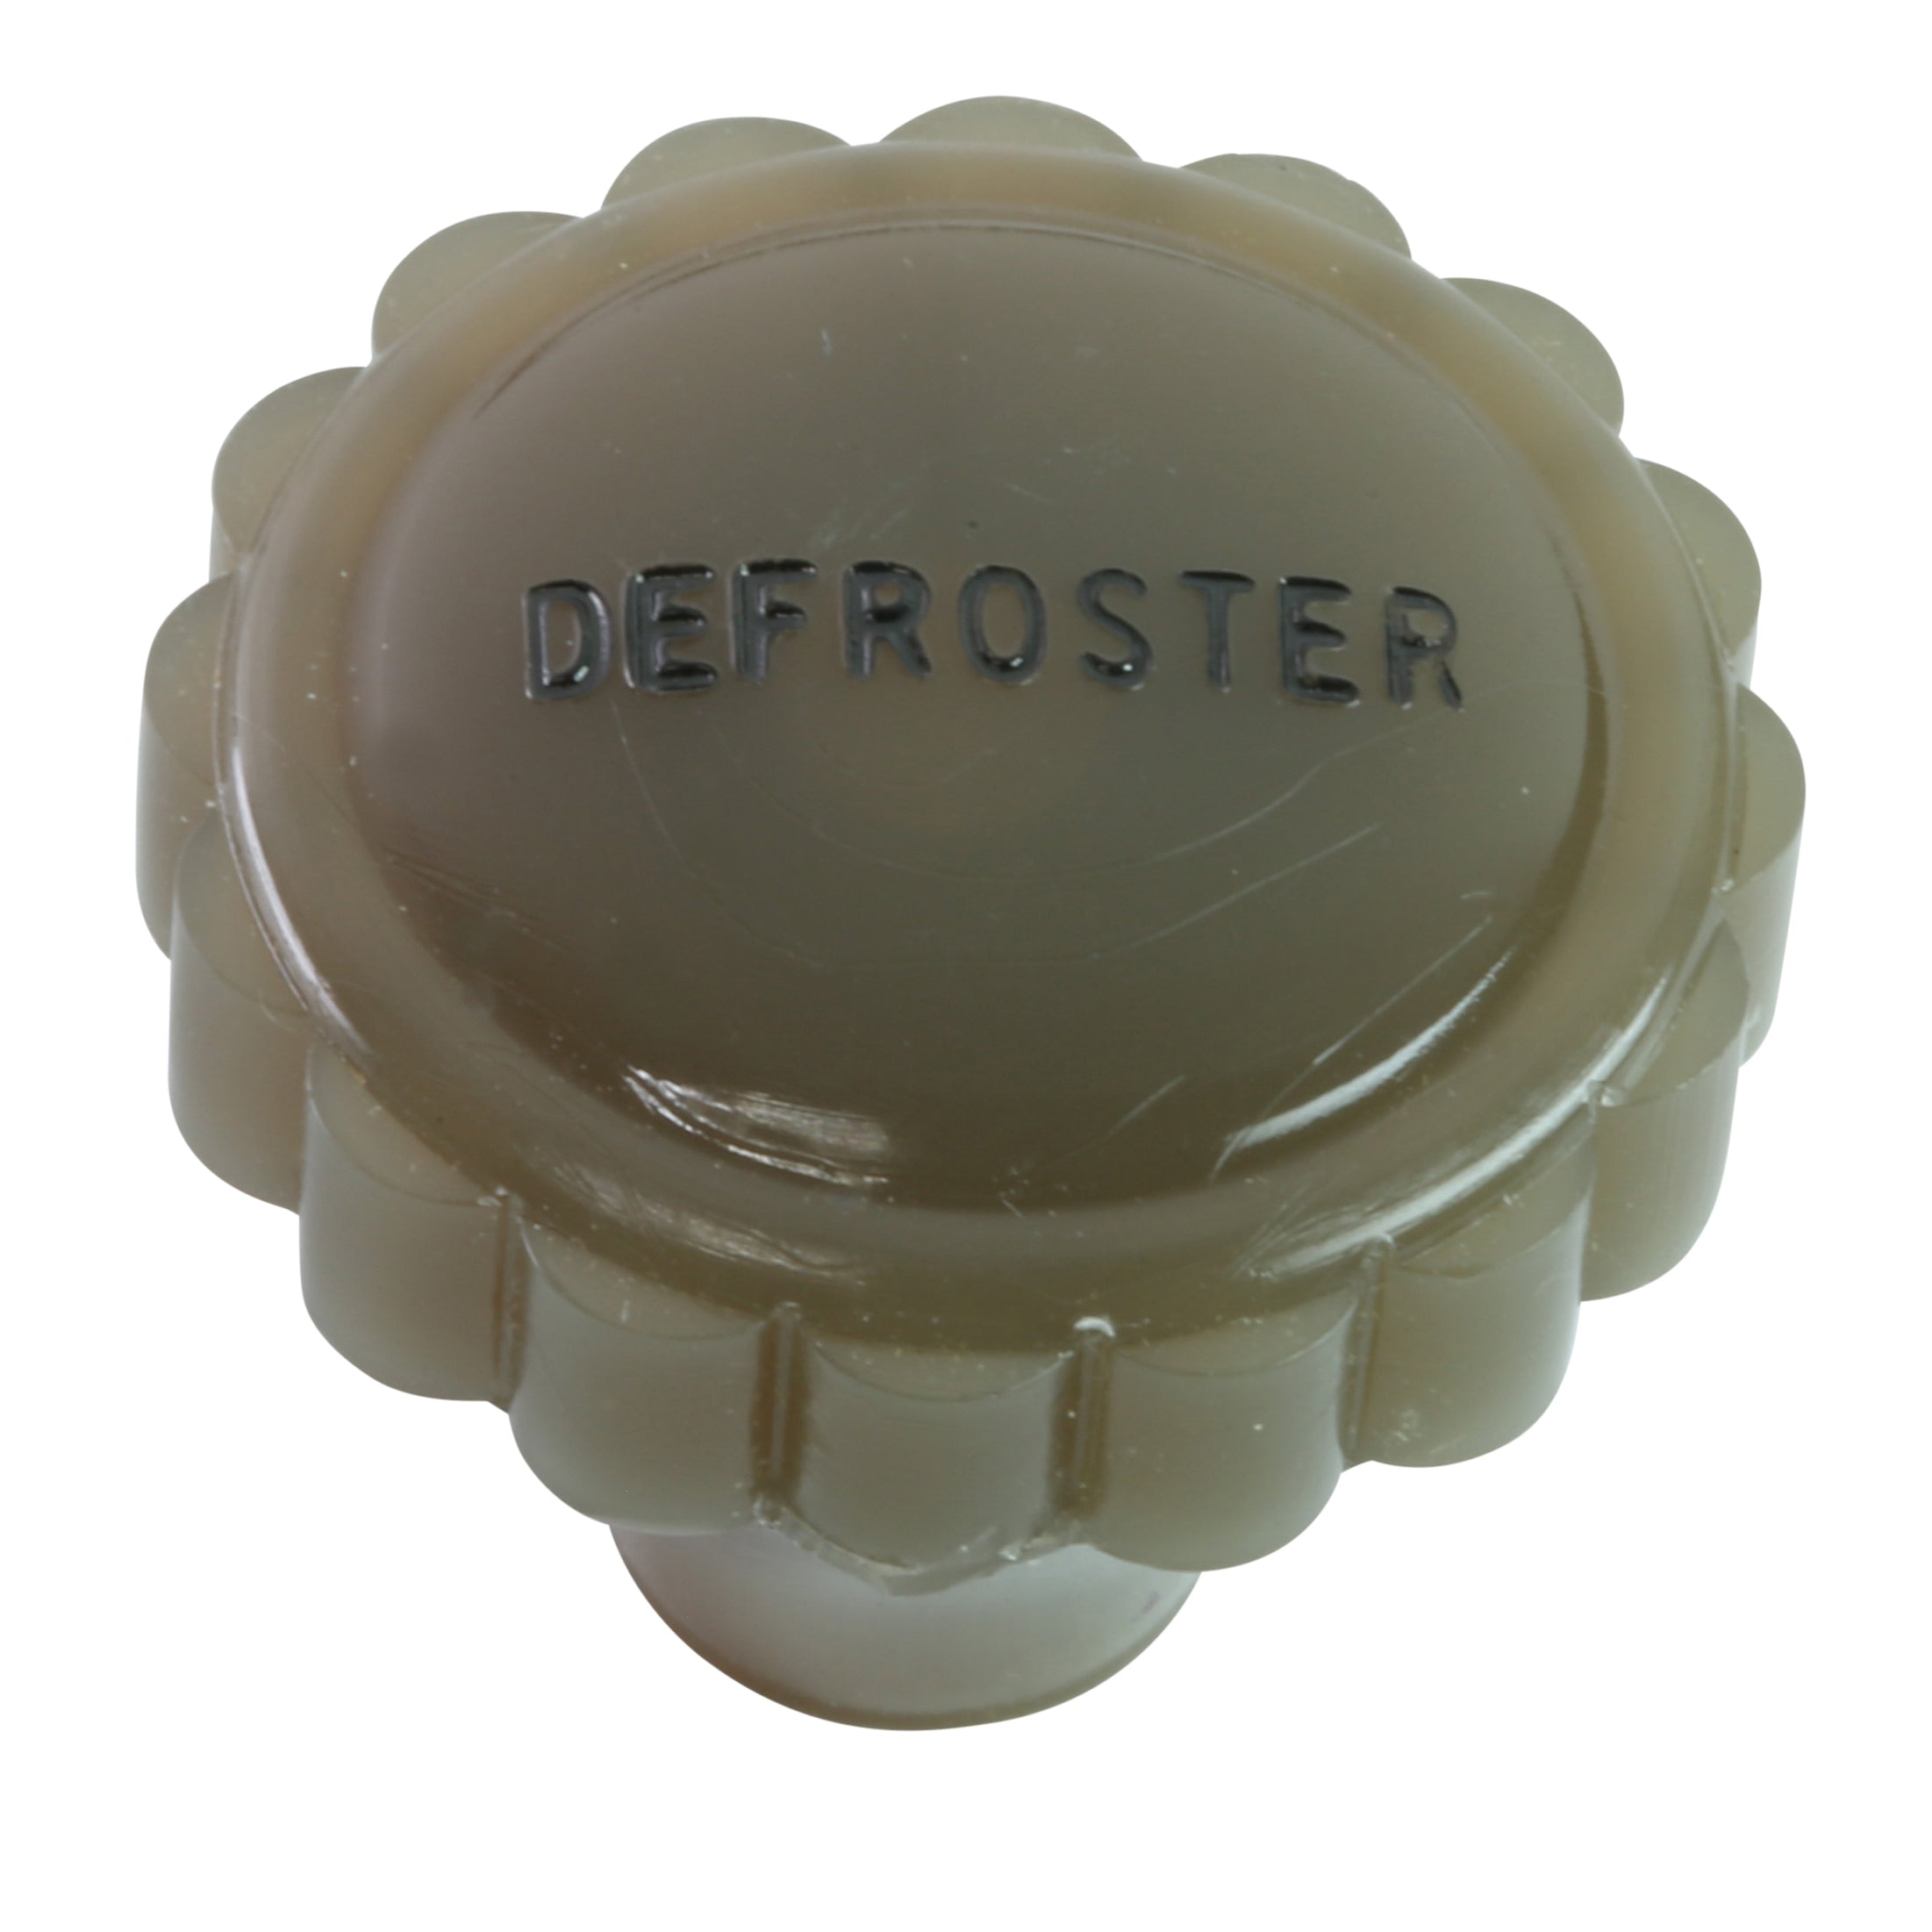 Hot Water Heater Defroster Knob • 1937 Ford Standard